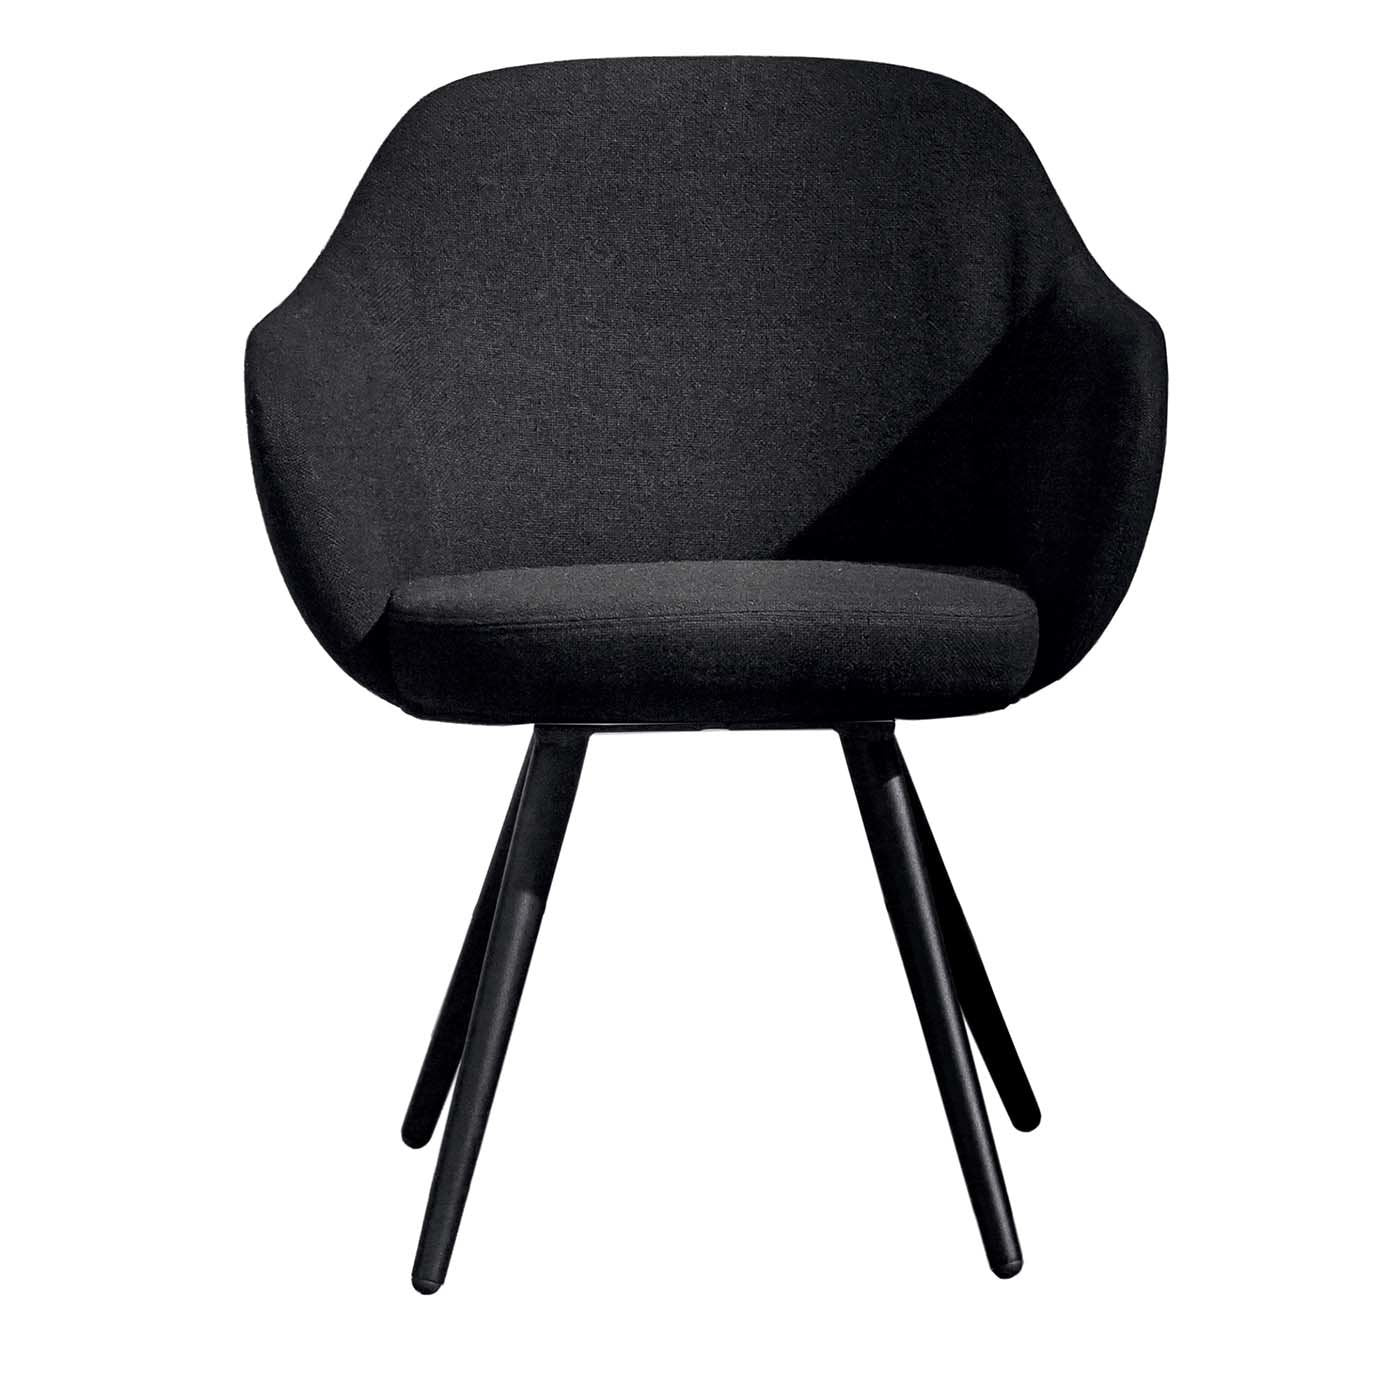 Cadira Cone-Shaped Black Chair with Armrests - Main view